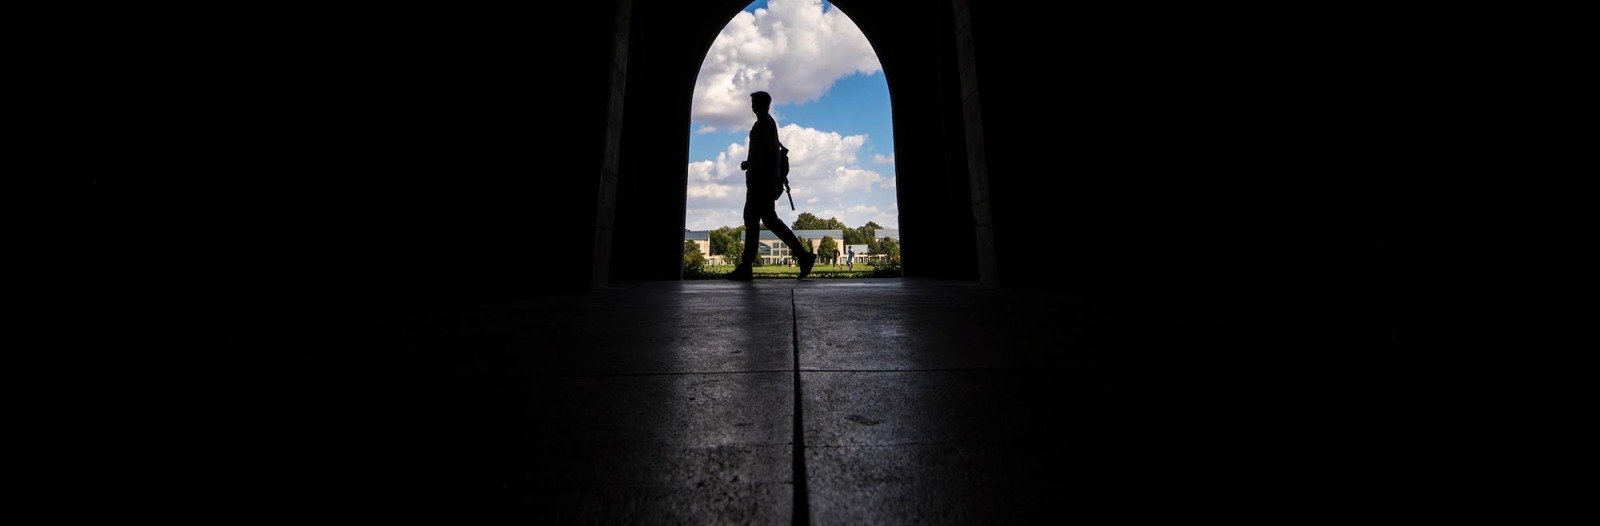 Silhouette of student walking in loggia archway